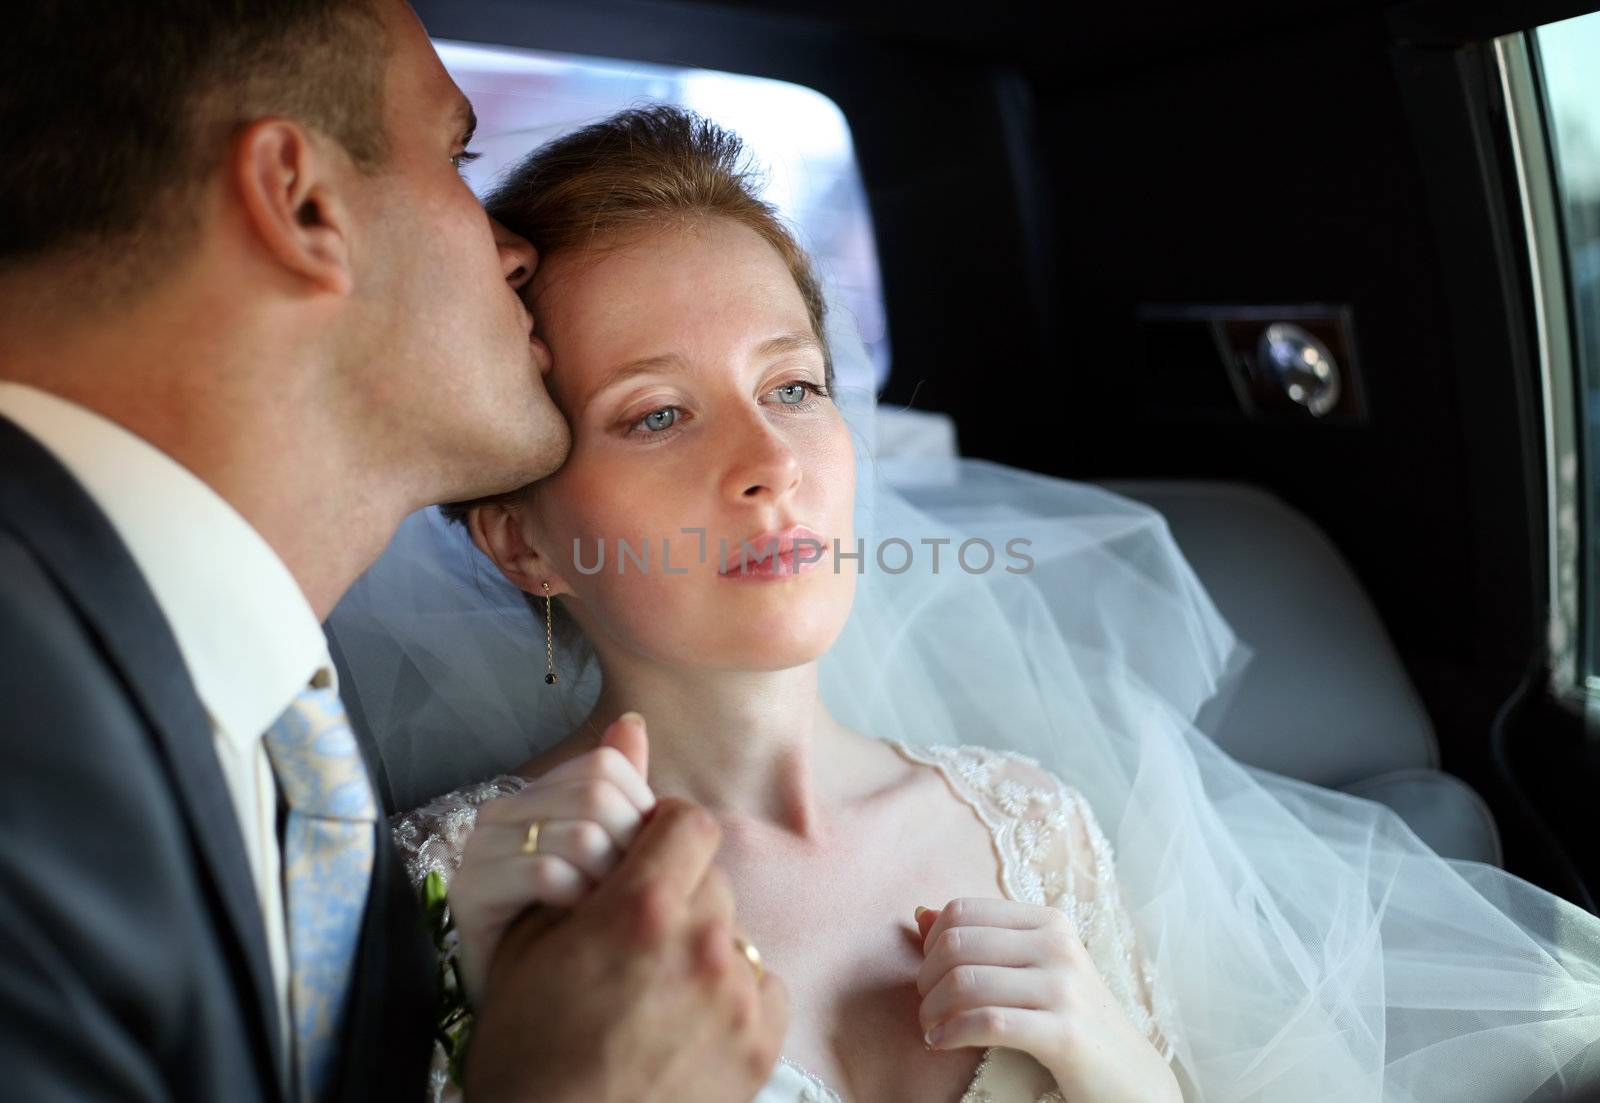 The groom kisses the bride in the automobile